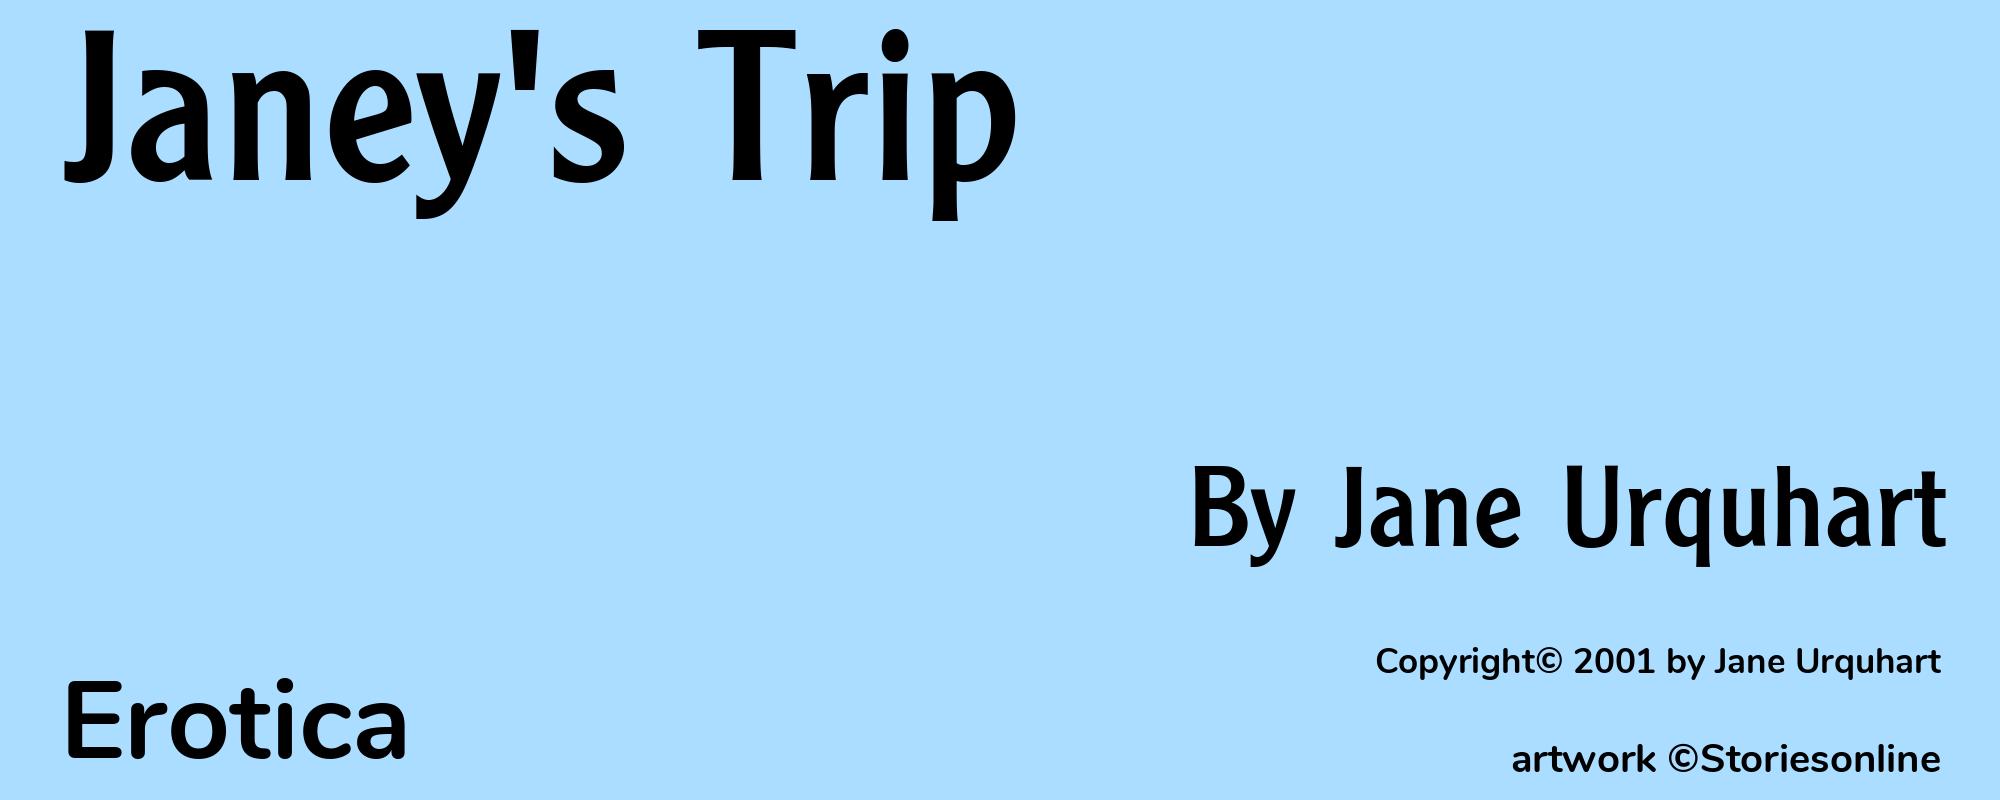 Janey's Trip - Cover